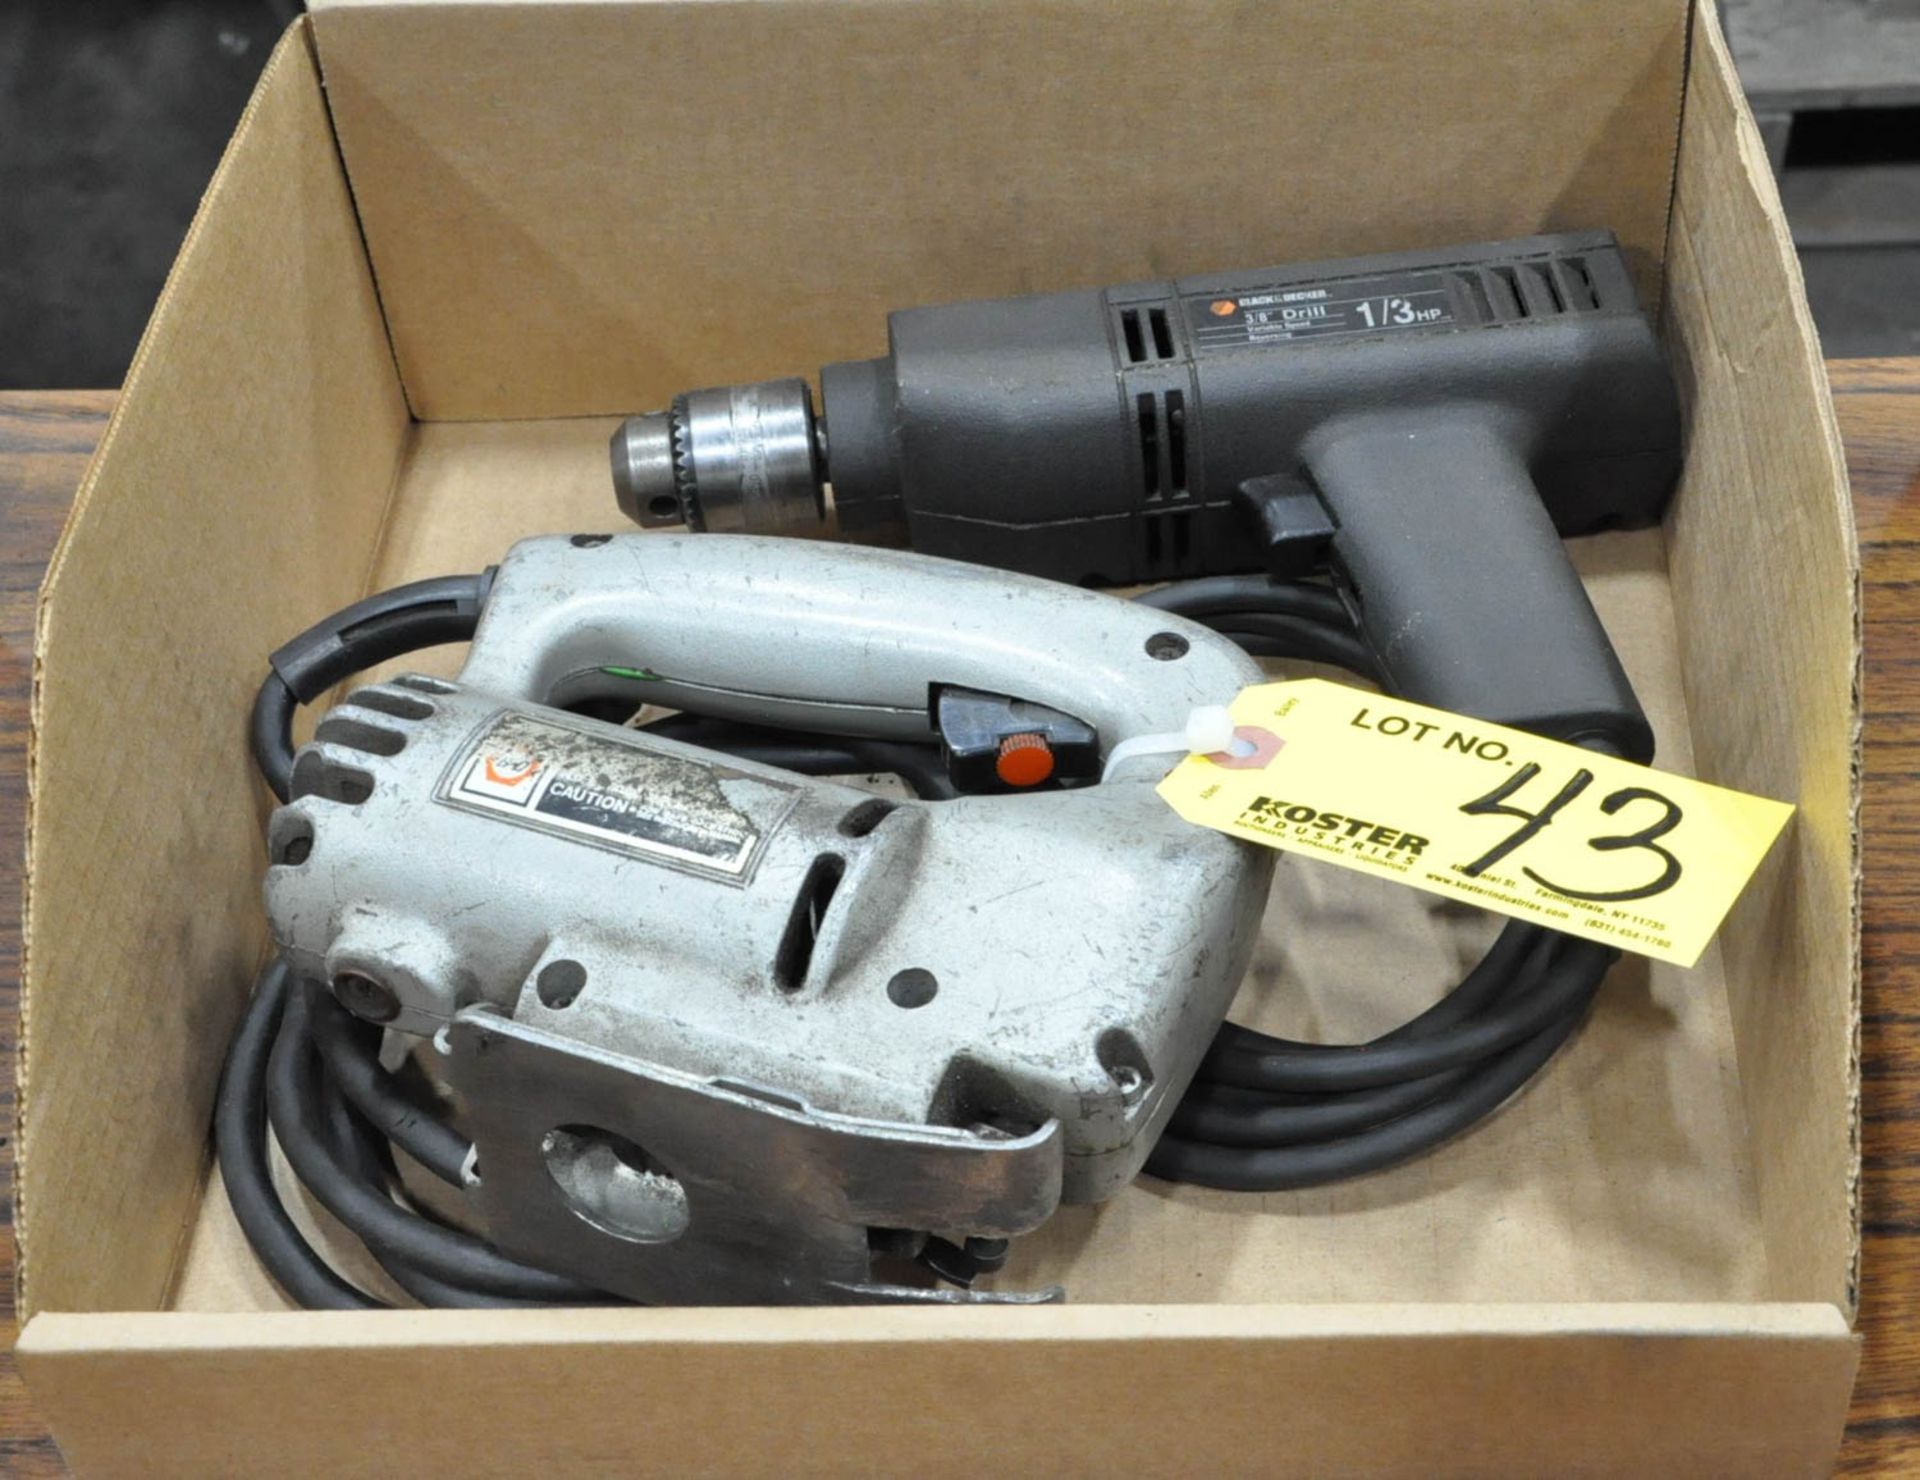 (1) BLACK & DECKER 3/8" DRILL AND (1) JIG SAW IN (1) BOX, (TOOL ROOM)